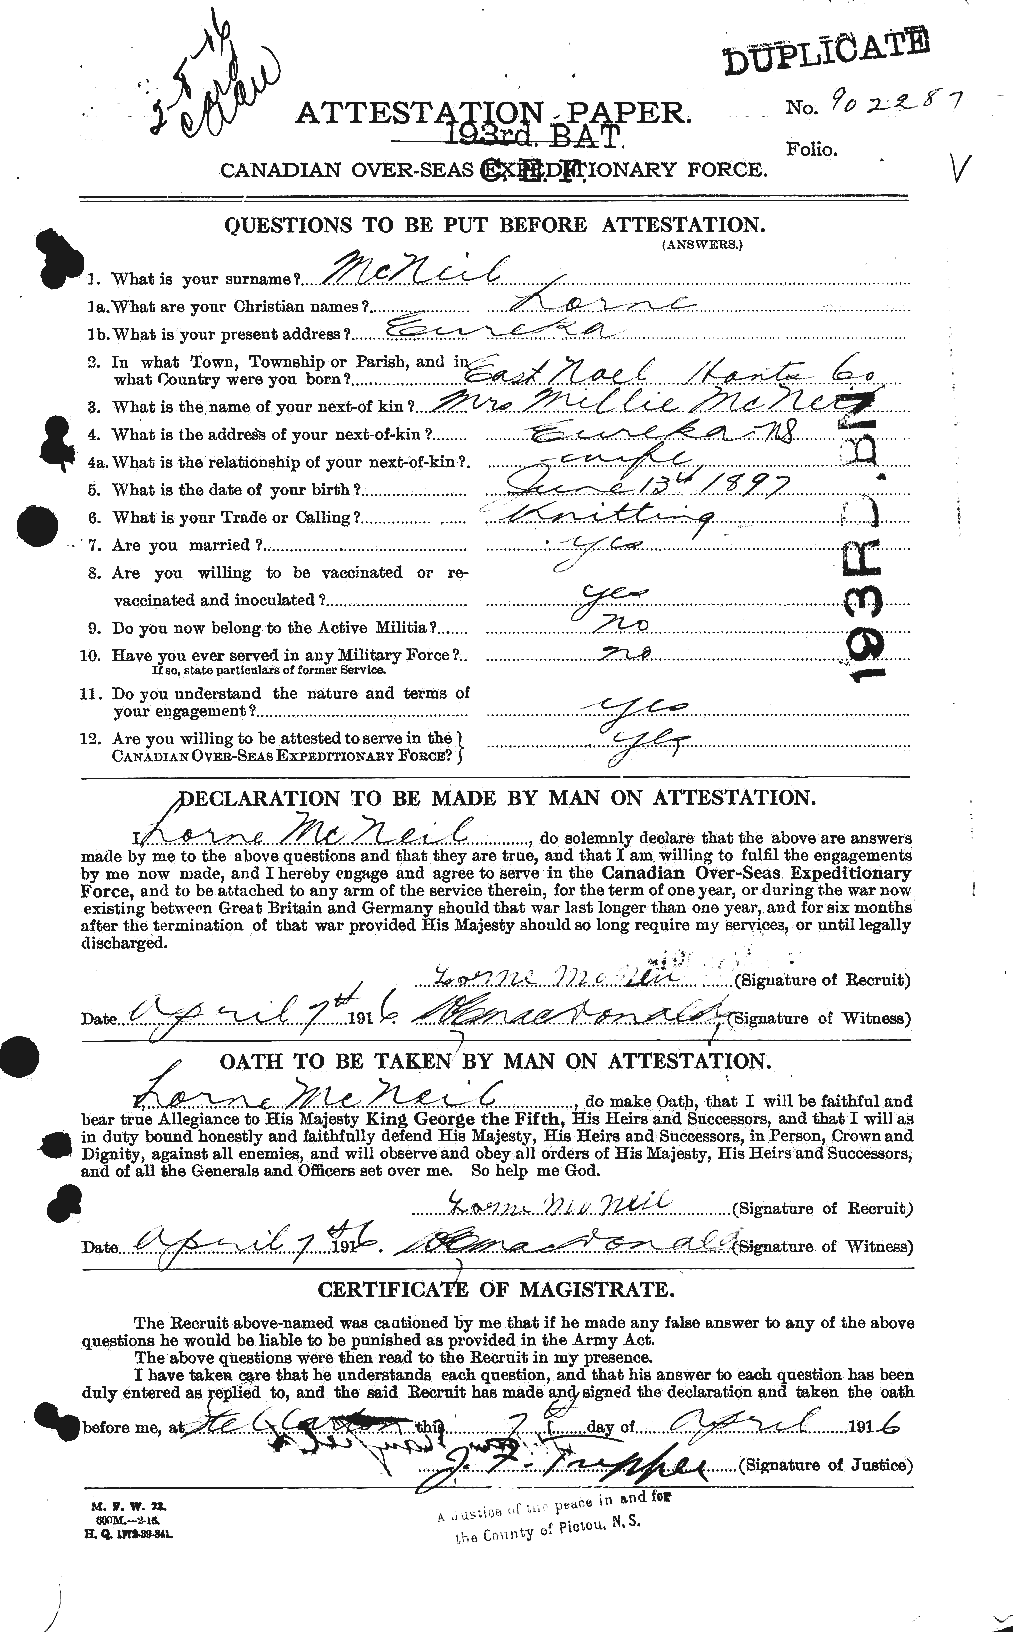 Personnel Records of the First World War - CEF 542386a